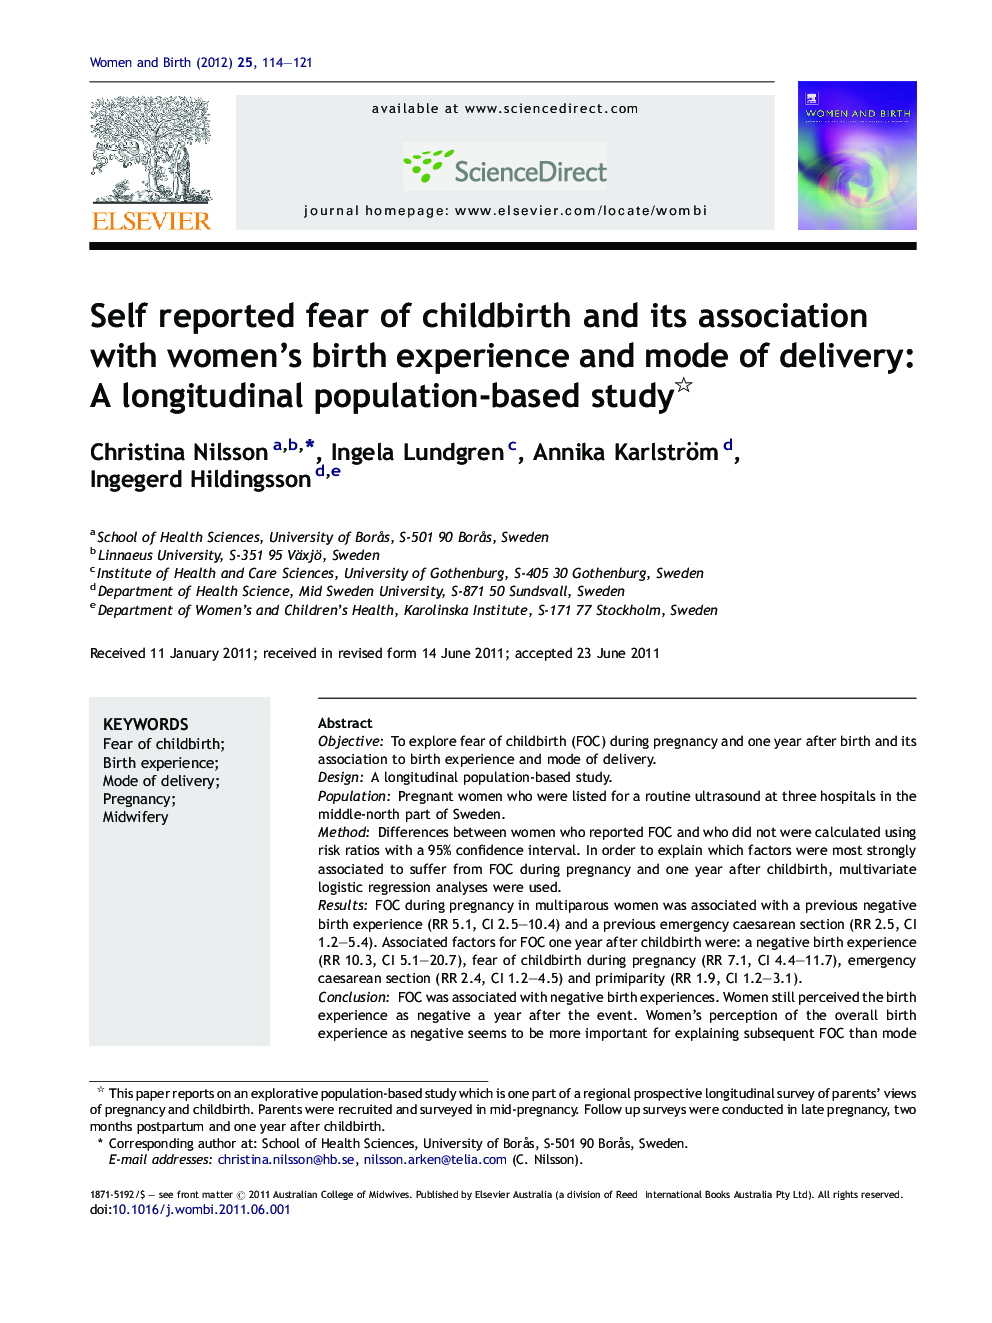 Self reported fear of childbirth and its association with women's birth experience and mode of delivery: A longitudinal population-based study 